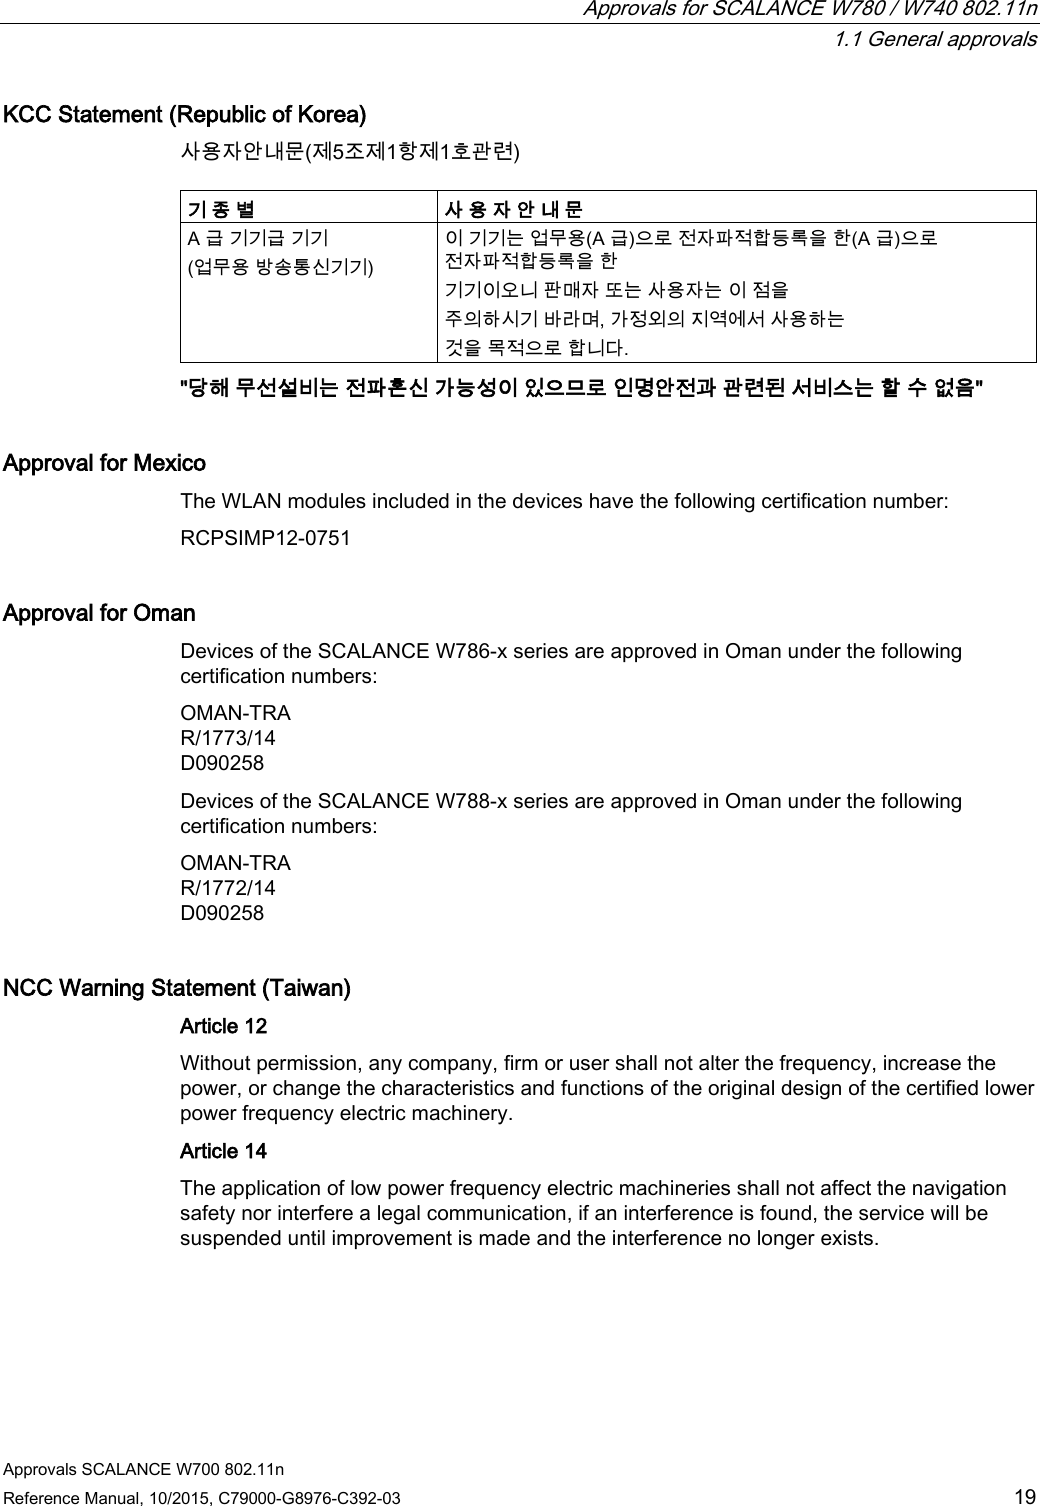  Approvals for SCALANCE W780 / W740 802.11n  1.1 General approvals Approvals SCALANCE W700 802.11n Reference Manual, 10/2015, C79000-G8976-C392-03 19 KCC Statement (Republic of Korea) 사용자안내문(제5조제1항제1호관련)  기 종 별 사 용 자 안 내 문 A 급 기기급 기기 (업무용 방송통신기기) 이 기기는 업무용(A 급)으로 전자파적합등록을 한(A 급)으로 전자파적합등록을 한 기기이오니 판매자 또는 사용자는 이 점을 주의하시기 바라며, 가정외의 지역에서 사용하는 것을 목적으로 합니다. &quot;당해 무선설비는 전파혼신 가능성이 있으므로 인명안전과 관련된 서비스는 할 수 없음&quot; Approval for Mexico The WLAN modules included in the devices have the following certification number: RCPSIMP12-0751 Approval for Oman Devices of the SCALANCE W786-x series are approved in Oman under the following certification numbers: OMAN-TRA R/1773/14 D090258 Devices of the SCALANCE W788-x series are approved in Oman under the following certification numbers: OMAN-TRA R/1772/14 D090258 NCC Warning Statement (Taiwan) Article 12 Without permission, any company, firm or user shall not alter the frequency, increase the power, or change the characteristics and functions of the original design of the certified lower power frequency electric machinery. Article 14 The application of low power frequency electric machineries shall not affect the navigation safety nor interfere a legal communication, if an interference is found, the service will be suspended until improvement is made and the interference no longer exists. 